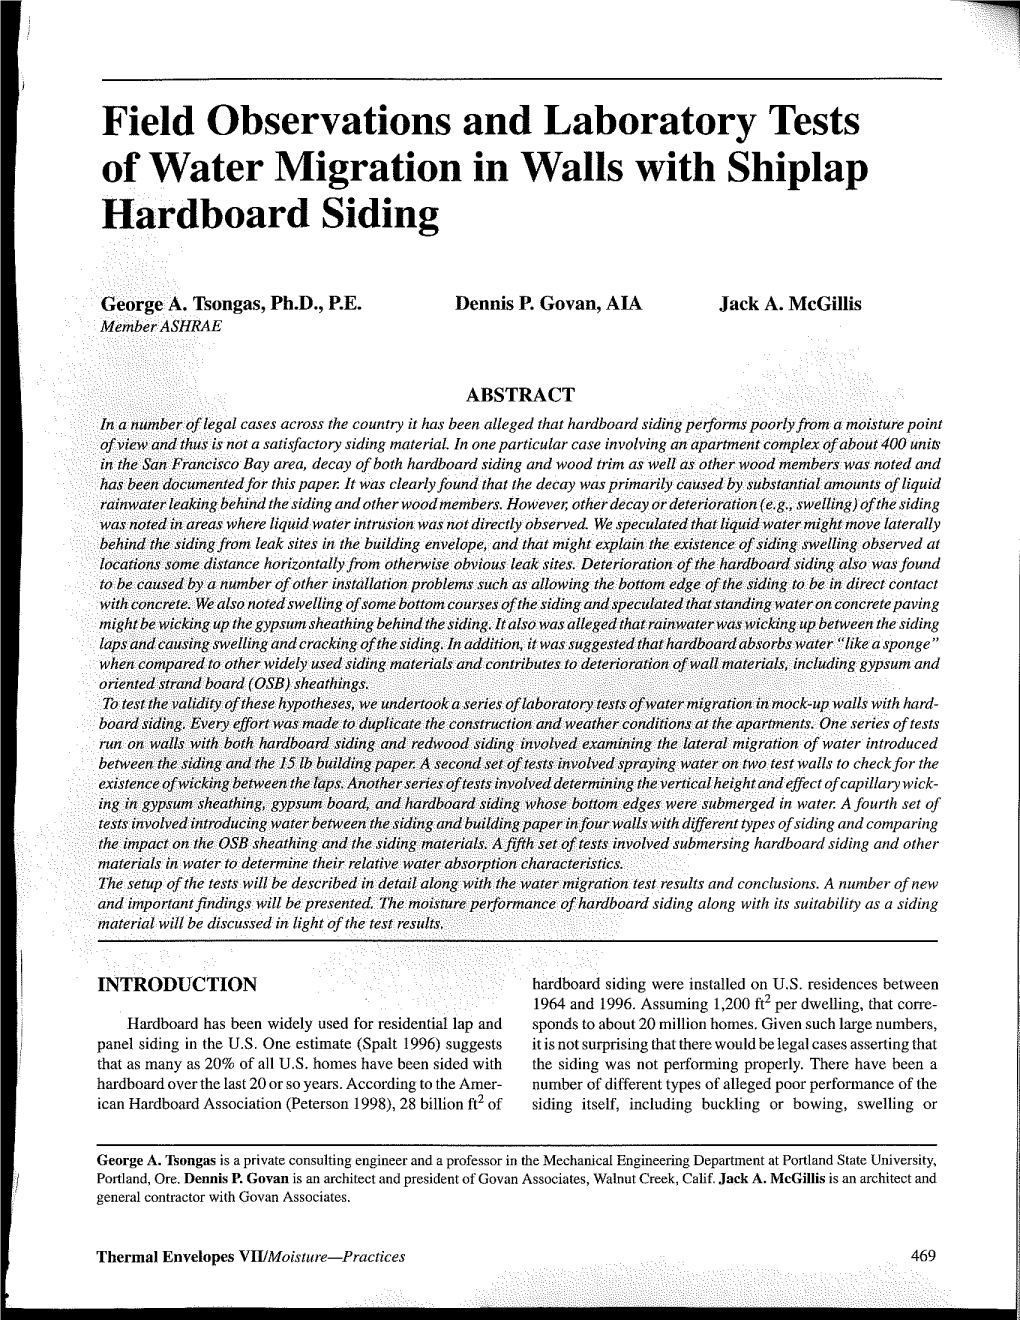 Field Observations and Laboratory Tests of Water Migration in Walls with Shiplap Hardboard Siding